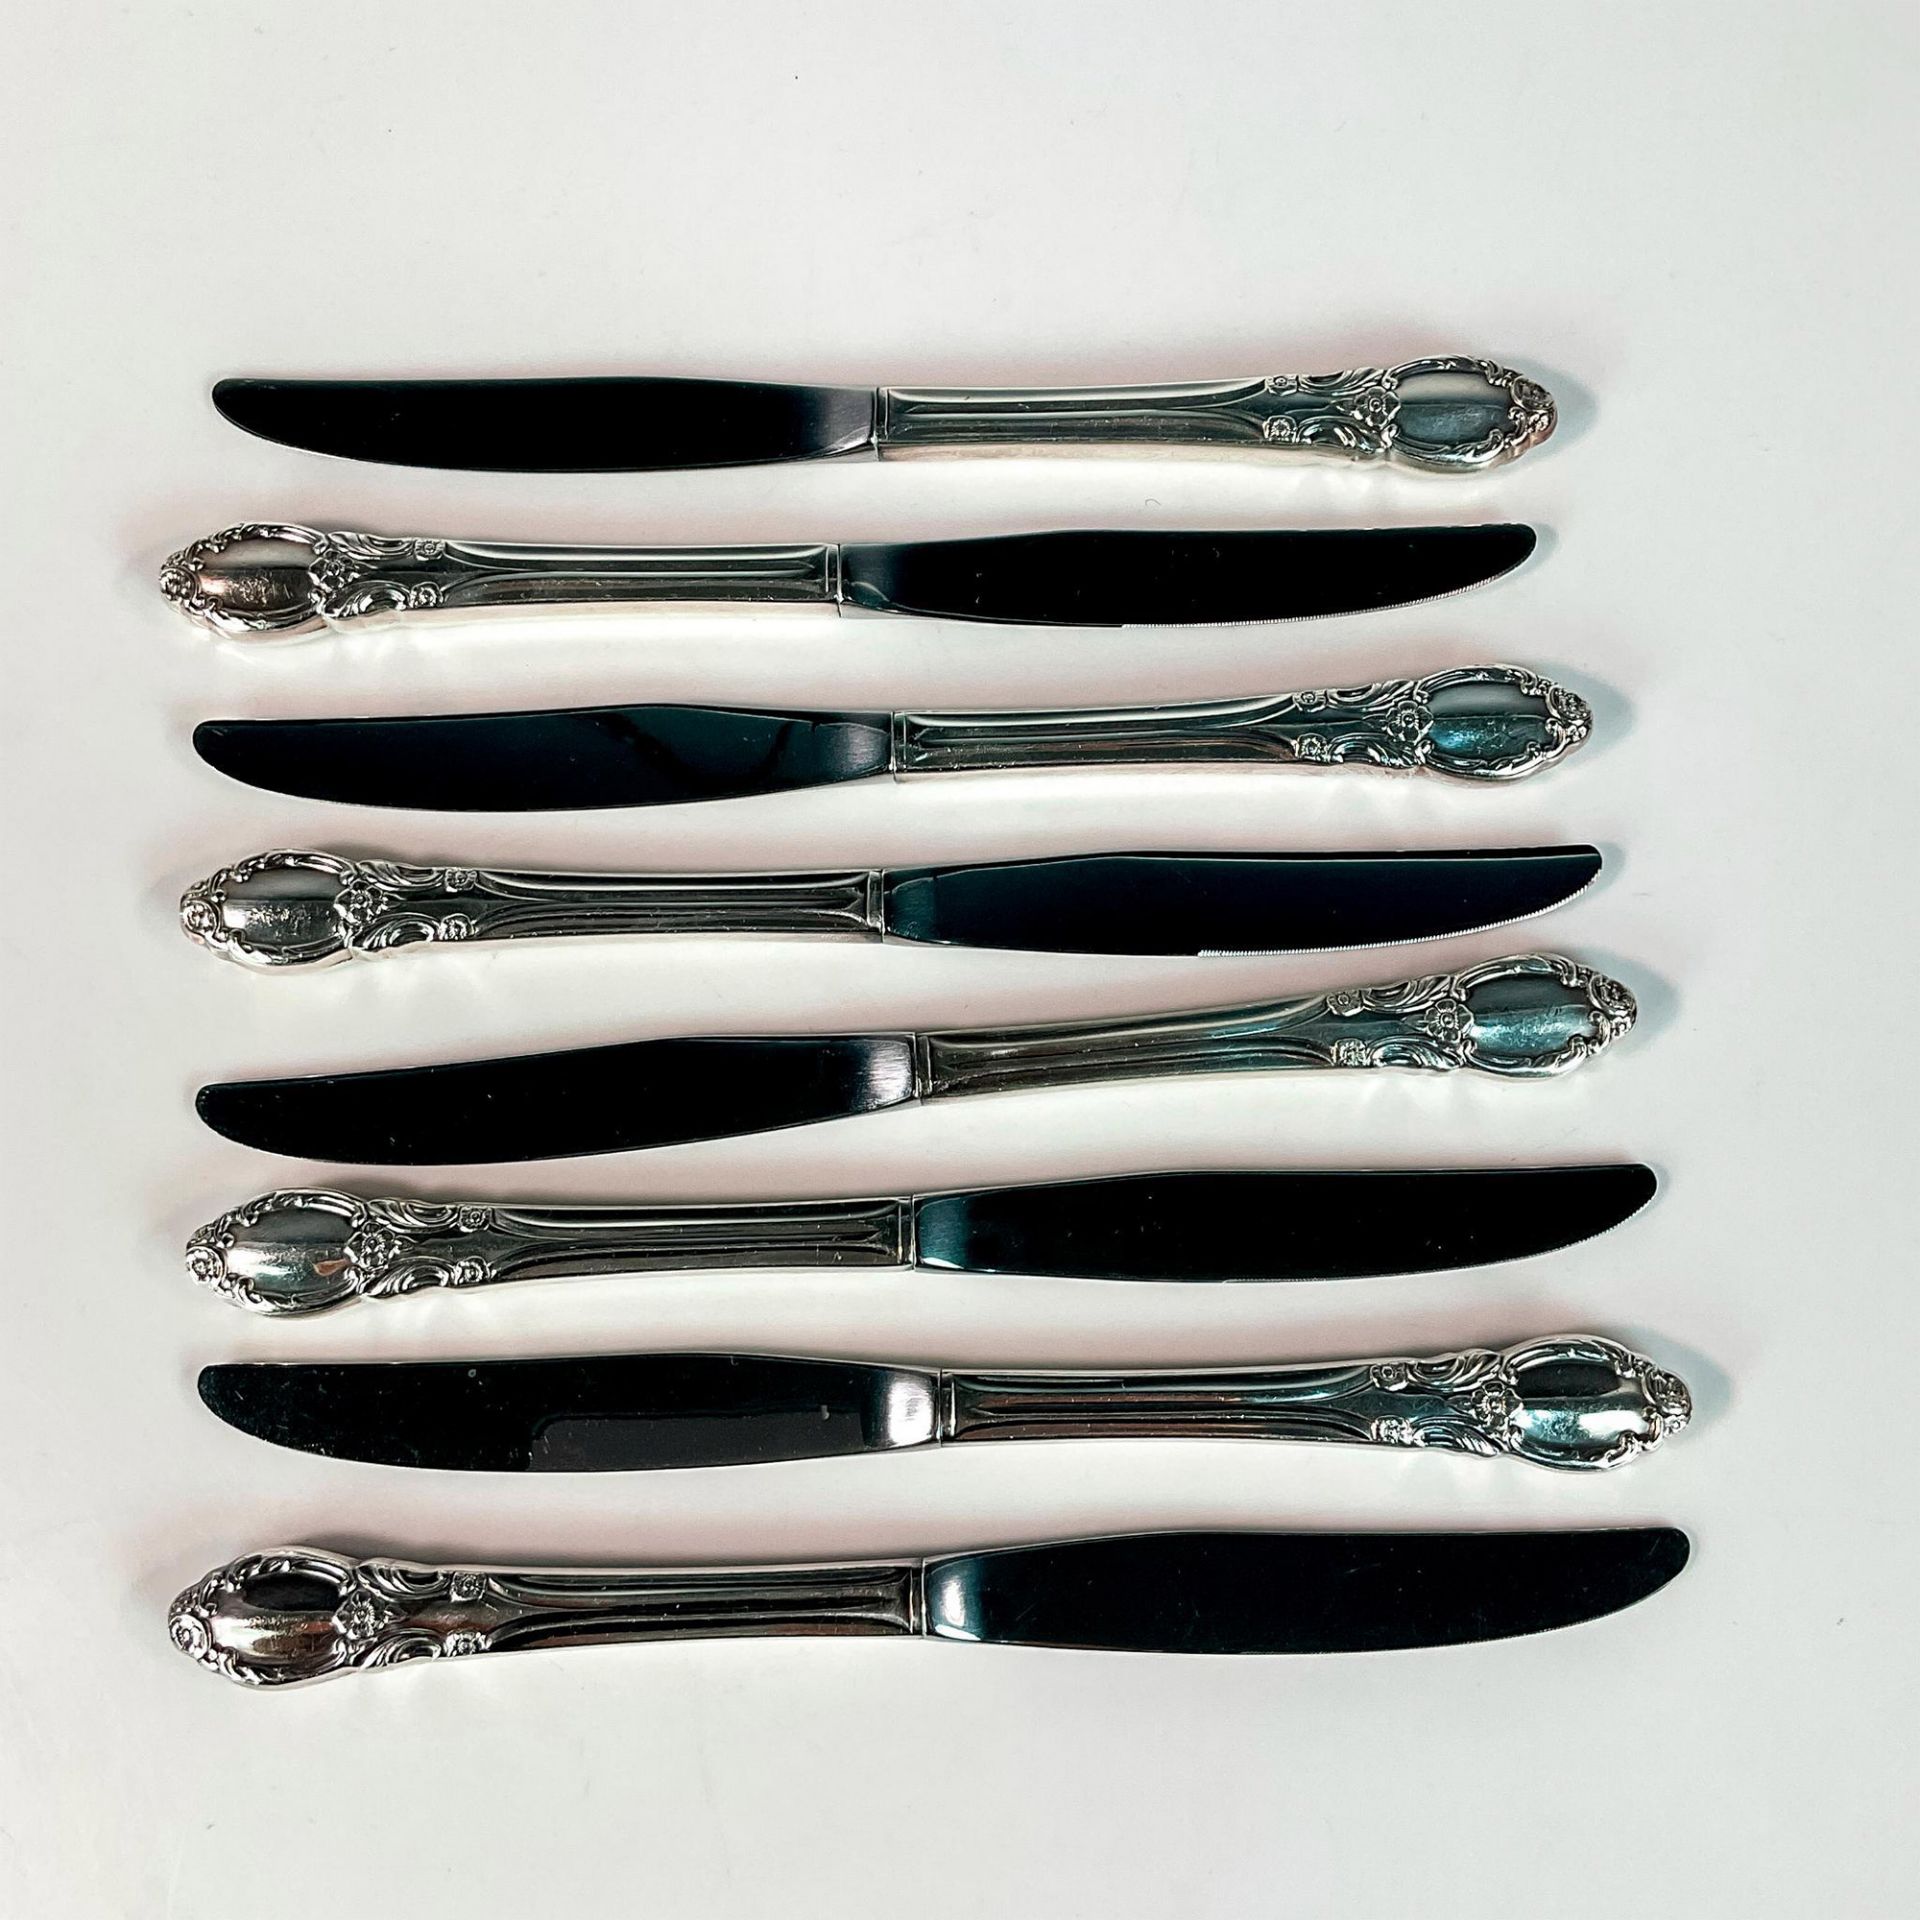 Set of 8 Silver Plated Flatware Knives